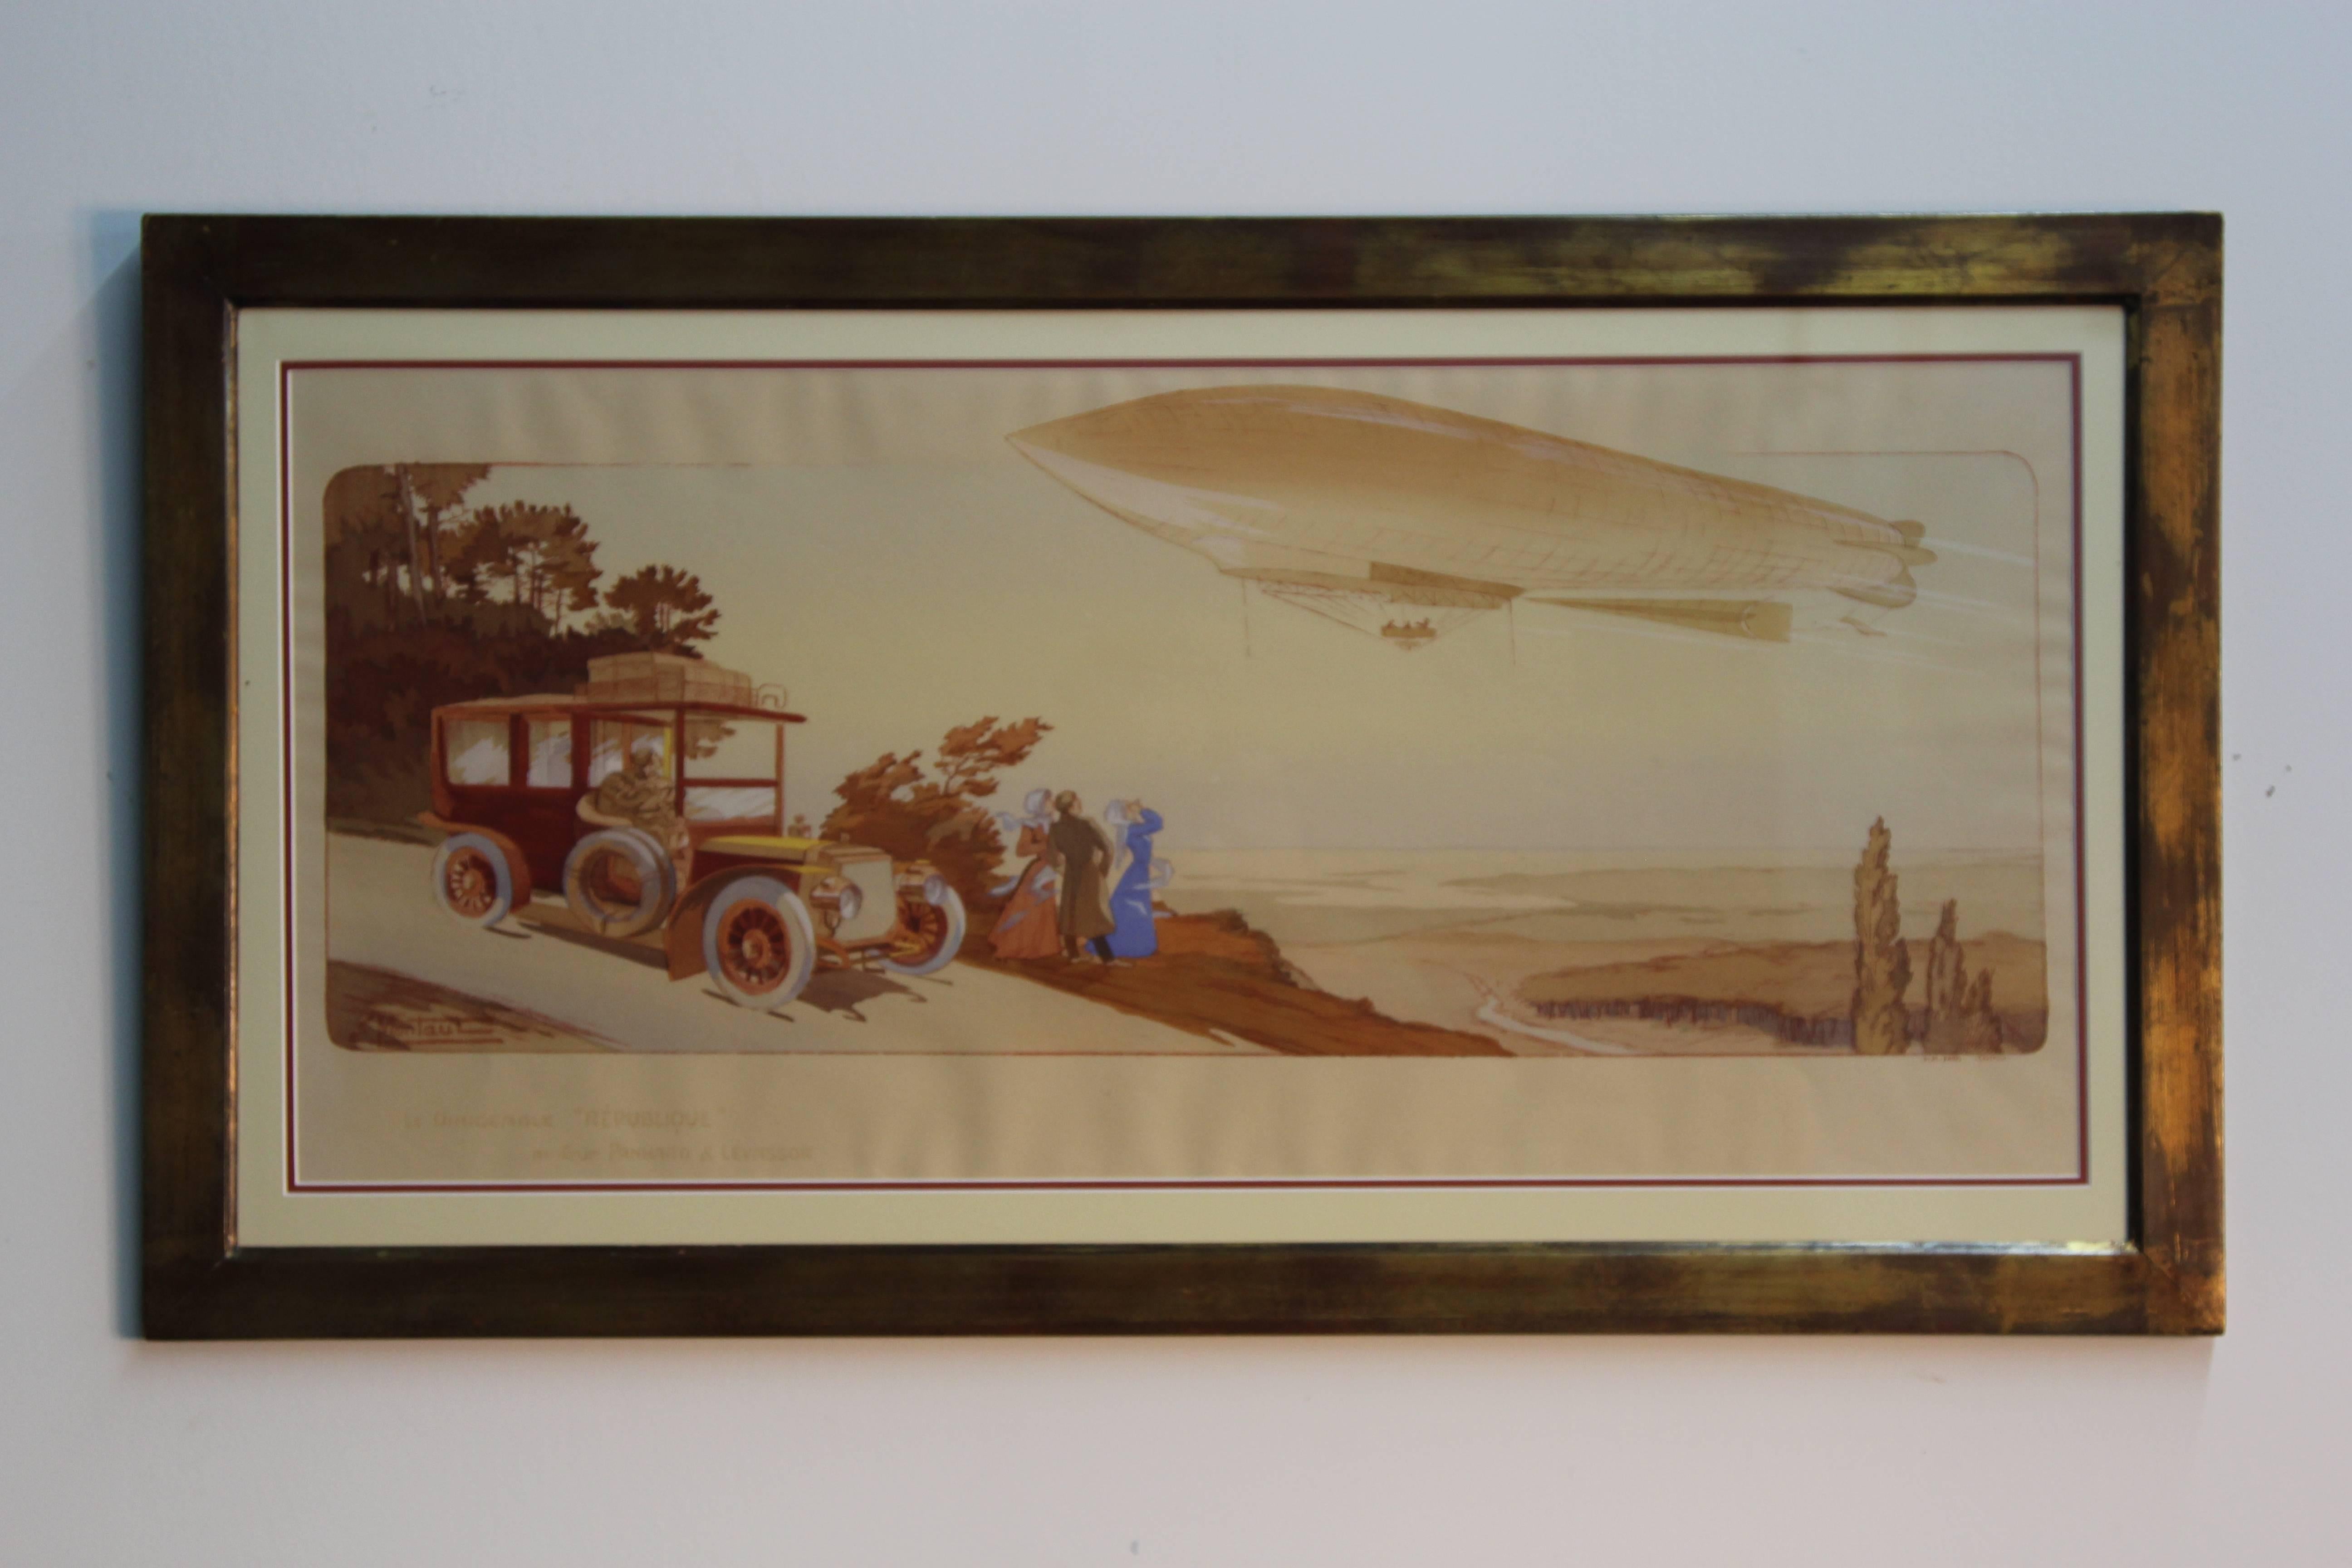 Rare set of four French vintage mobility lithographs, hand colored, circa 1910s-1920s. 2 by Gamy, 2 by E. Montaul.